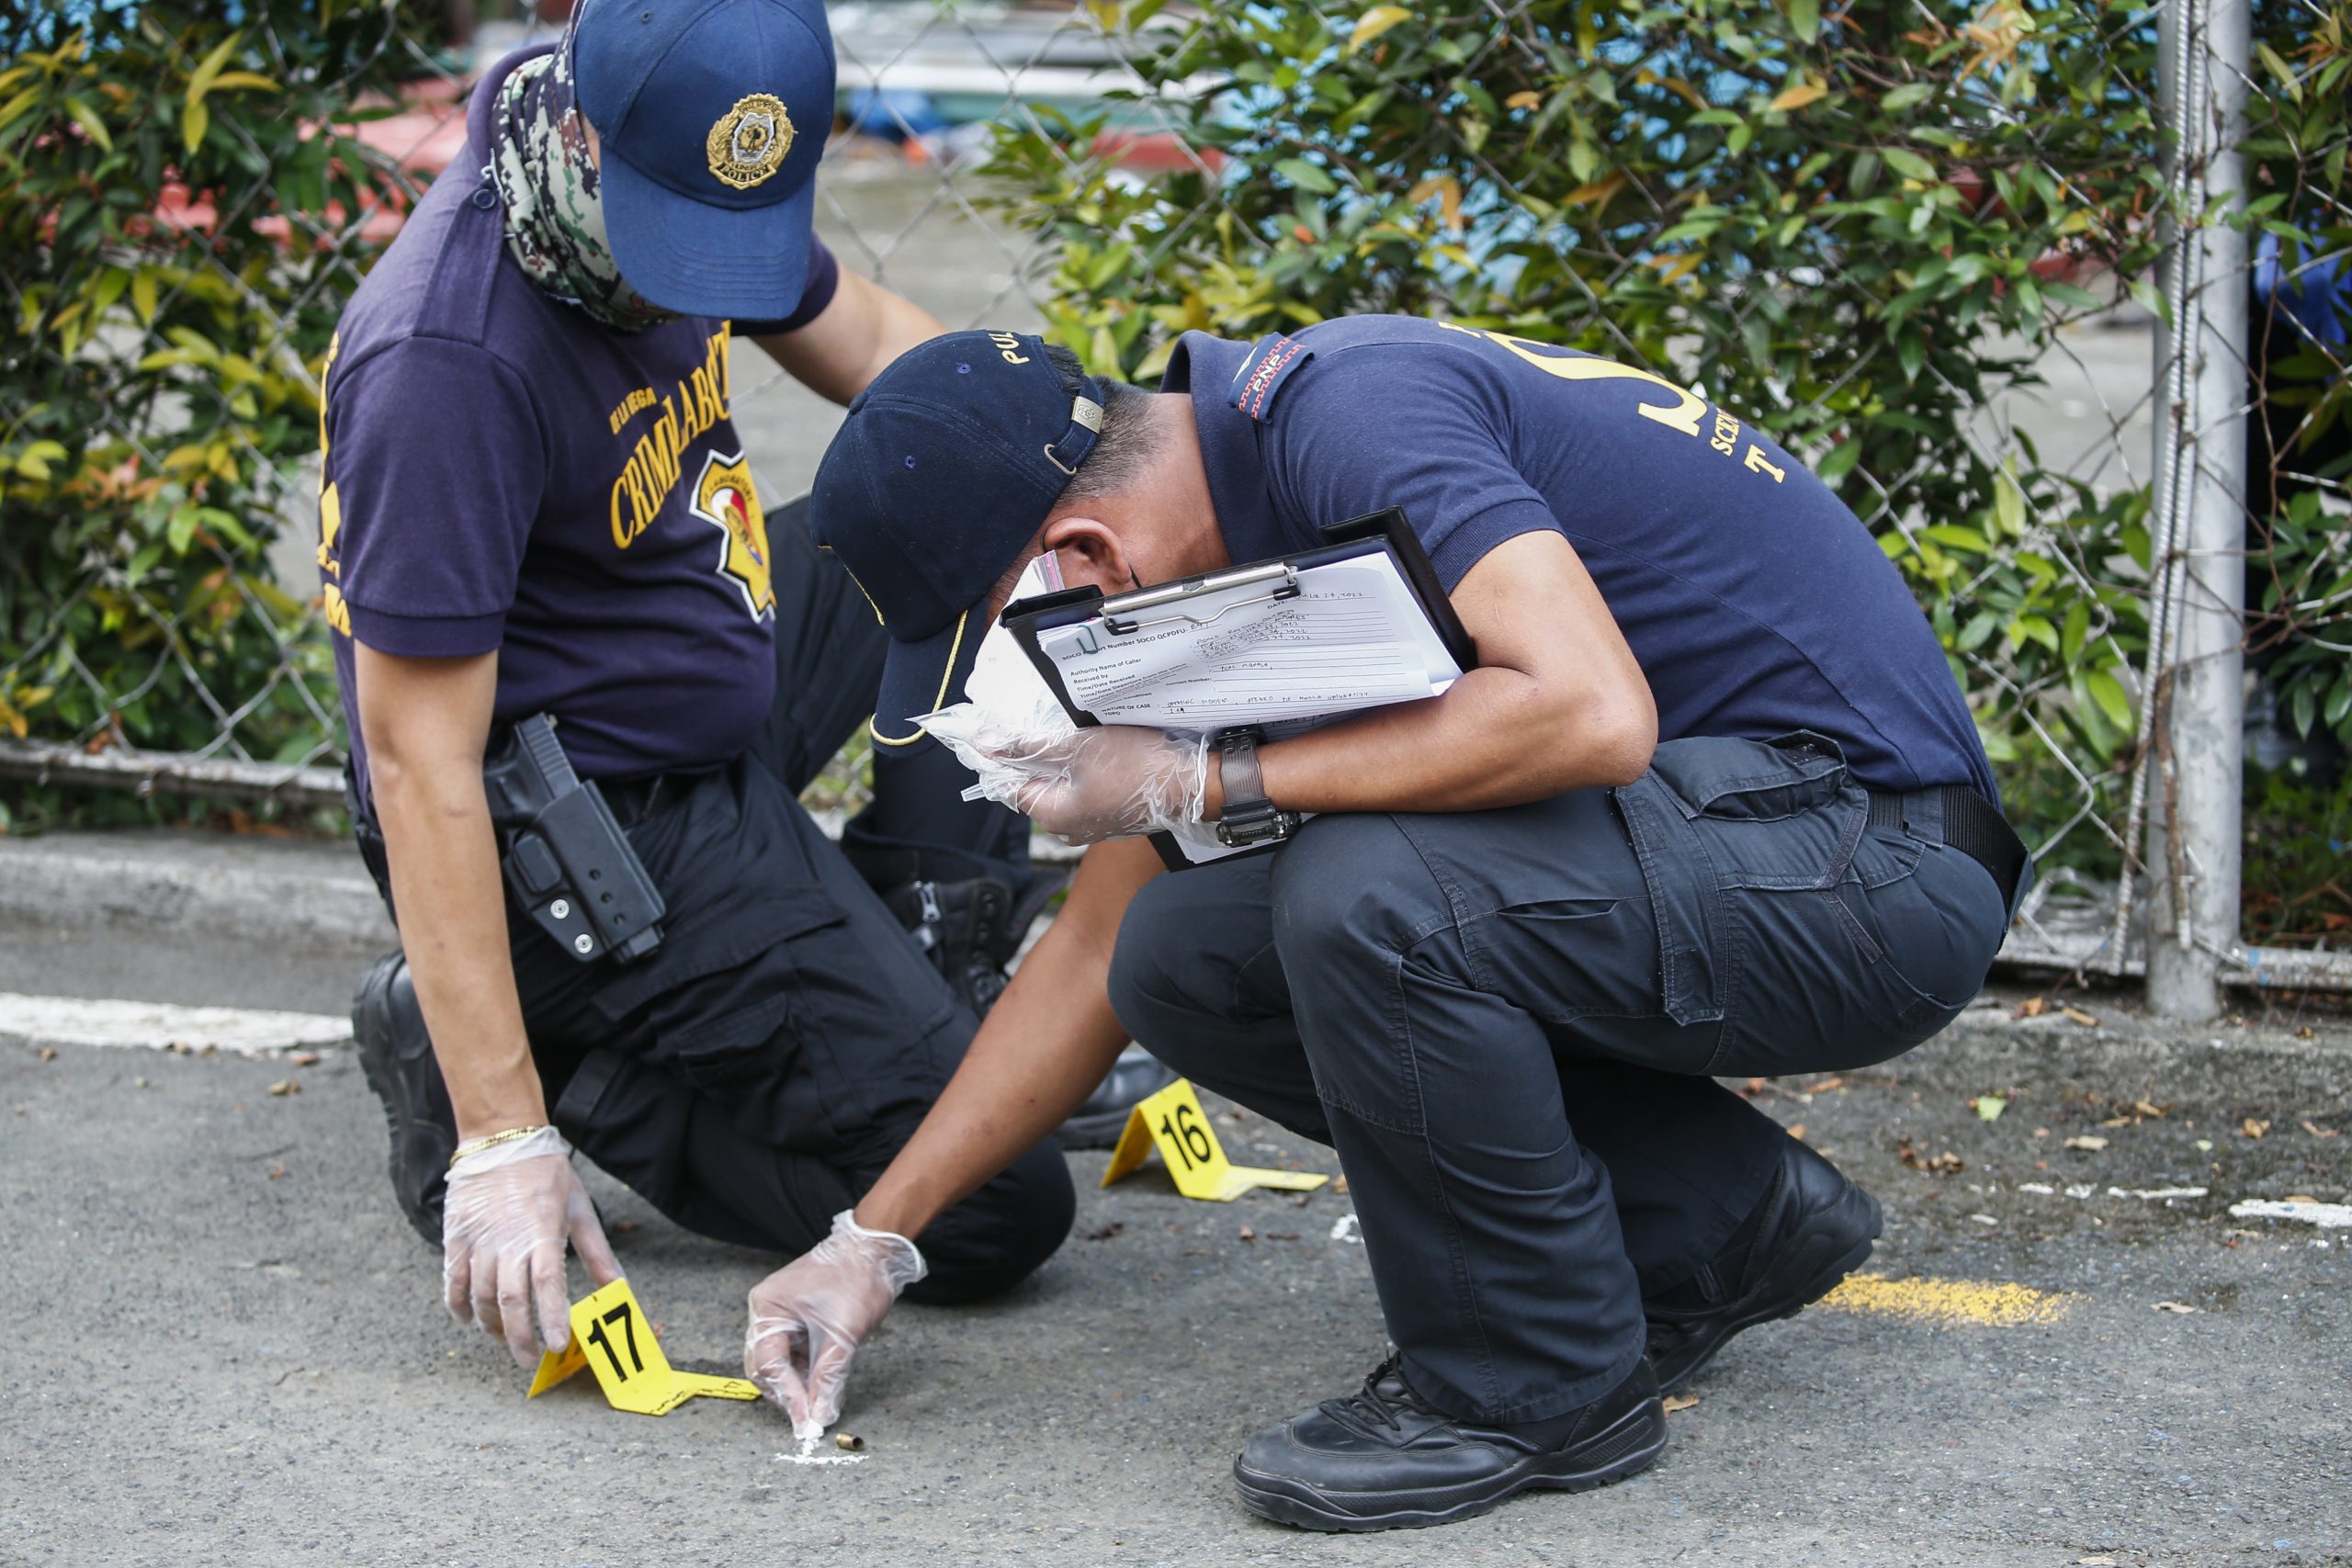 epa10089474 Philippine police investigate at areas related to a shooting incident at a university in Quezon City, Metro Manila, Philippines, 24 July 2022. Three people were killed and one other sustained injuries from a shooting incident as a law school commencement ceremony was scheduled to be held at the Ateneo de Manila University in Quezon City. Police investigators continue to determine motives for the shooting following the arrest of a suspect in the incident.  EPA/ROLEX DELA PENA